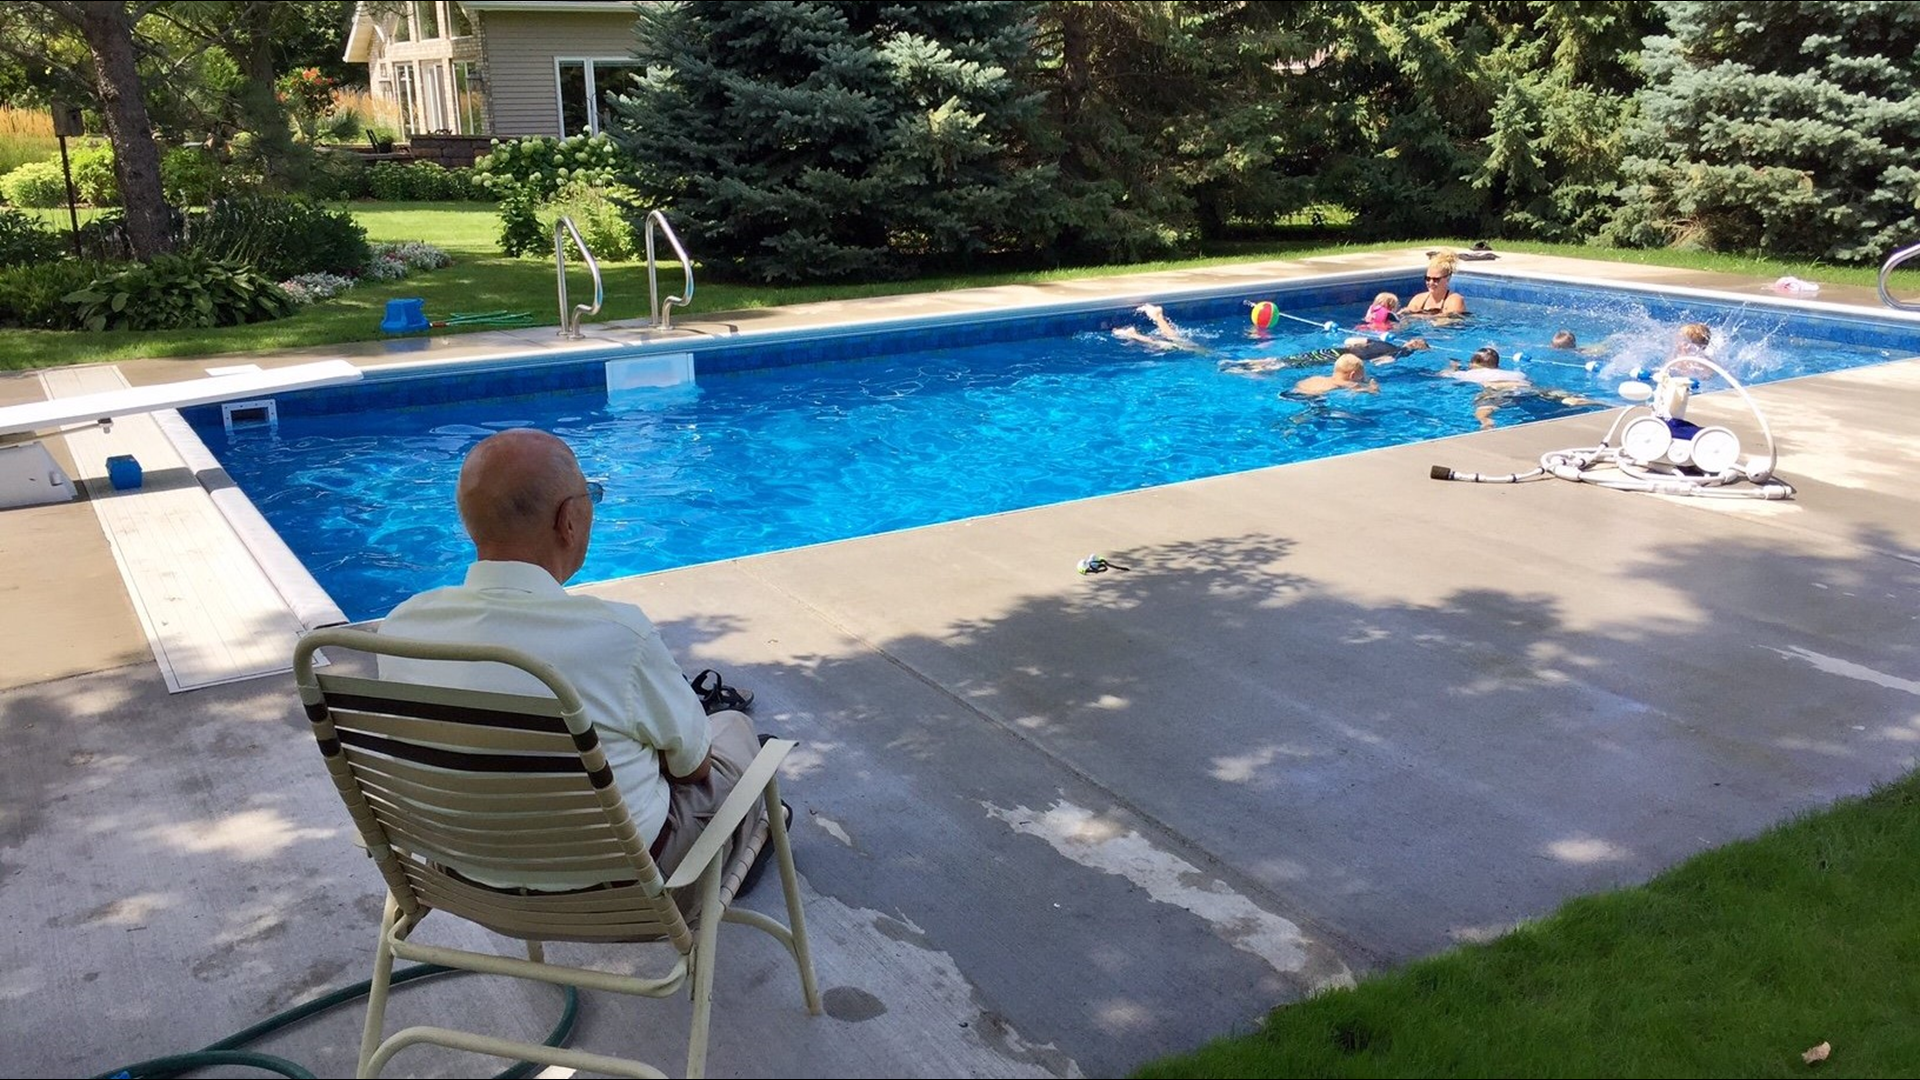 Lonely after the death of his wife, Keith Davison has filled his yard with children after installing a pool for the neighborhood in 2017.